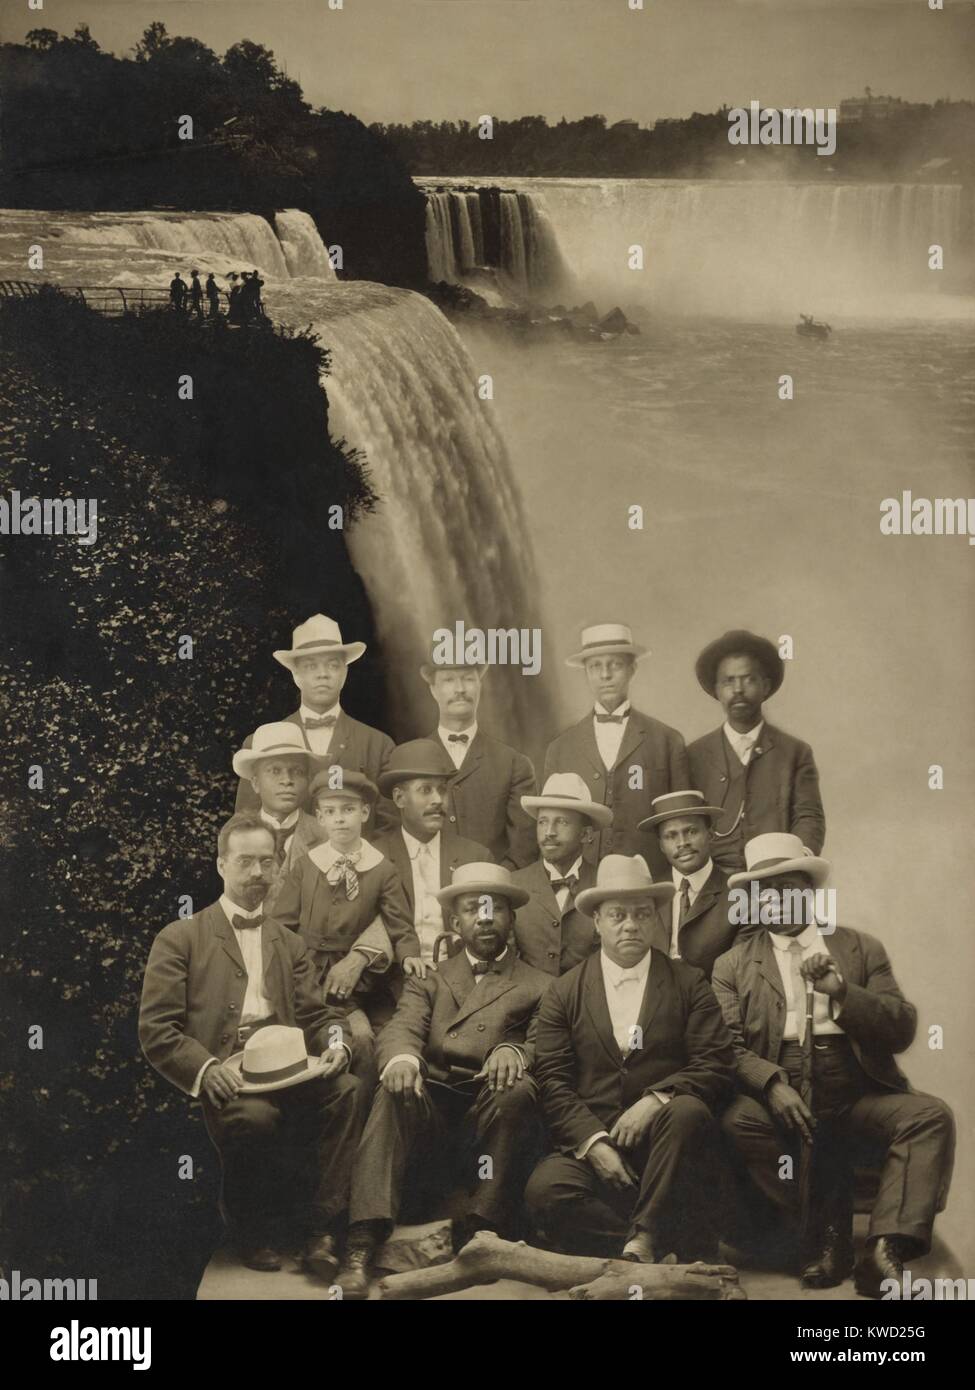 Niagara Movement founders superimposed over an image of Niagara Falls, 1905. Front Row, L-R:, Henry L. Baily of Washington, D.C.; Clement G. Morgan of Massachusetts; W.H.H. Hart of Washington, D.C.; and B.S. Smith of Kansas. Middle Row, L-R: Frederick L. McGhee of Minnesota; Norris Bumstead Herndon, son of Alonzo Herndon; J. Max Barber of Illinois; W.E.B. Du Bois of Atlanta, Georgia; and Robert Bonner of Massachusetts. Back Row, L-R: H.A. Thompson of New York; Alonzo F. Herndon of Georgia; John Hope of Georgia: and an unidentified man, possibly James R.L. Diggs  (BSLOC 2017 20 159) Stock Photo